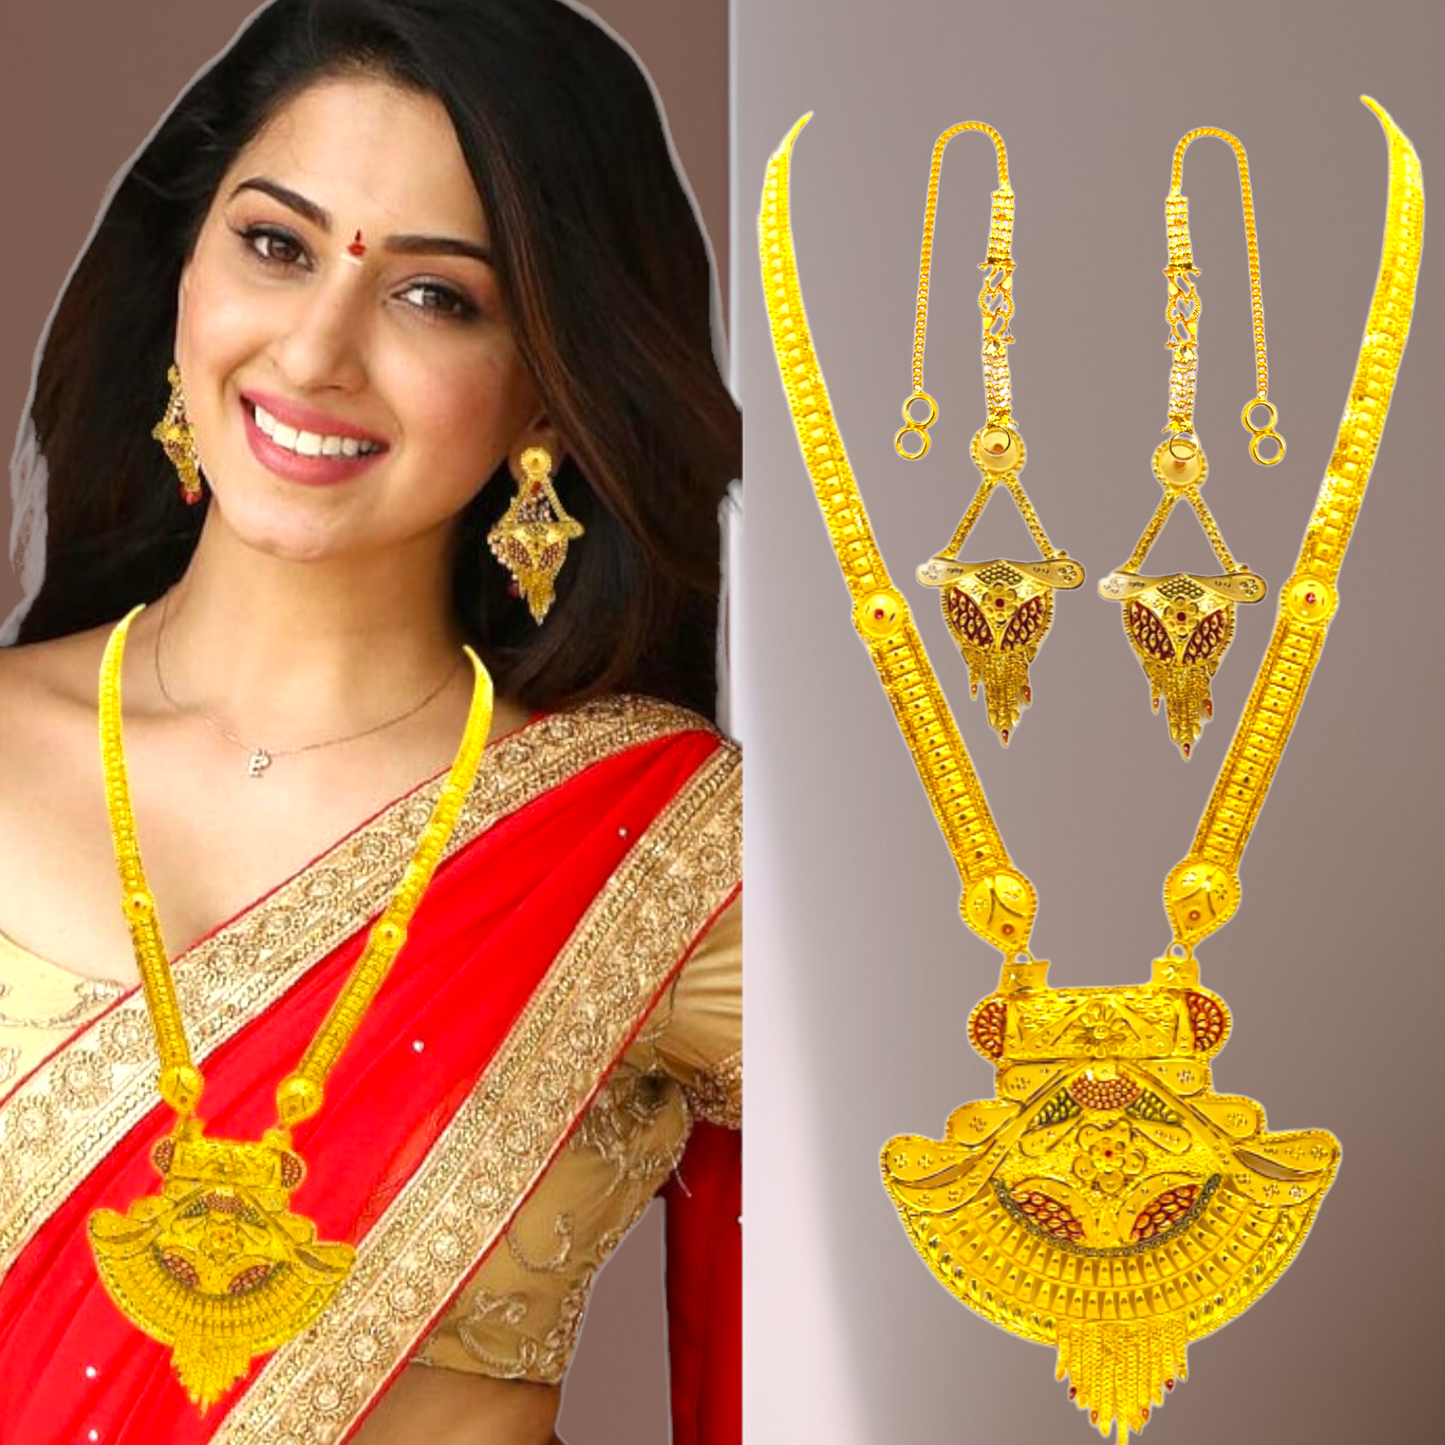 "Sophisticated Gilded Necklace and Earrings Pairing"